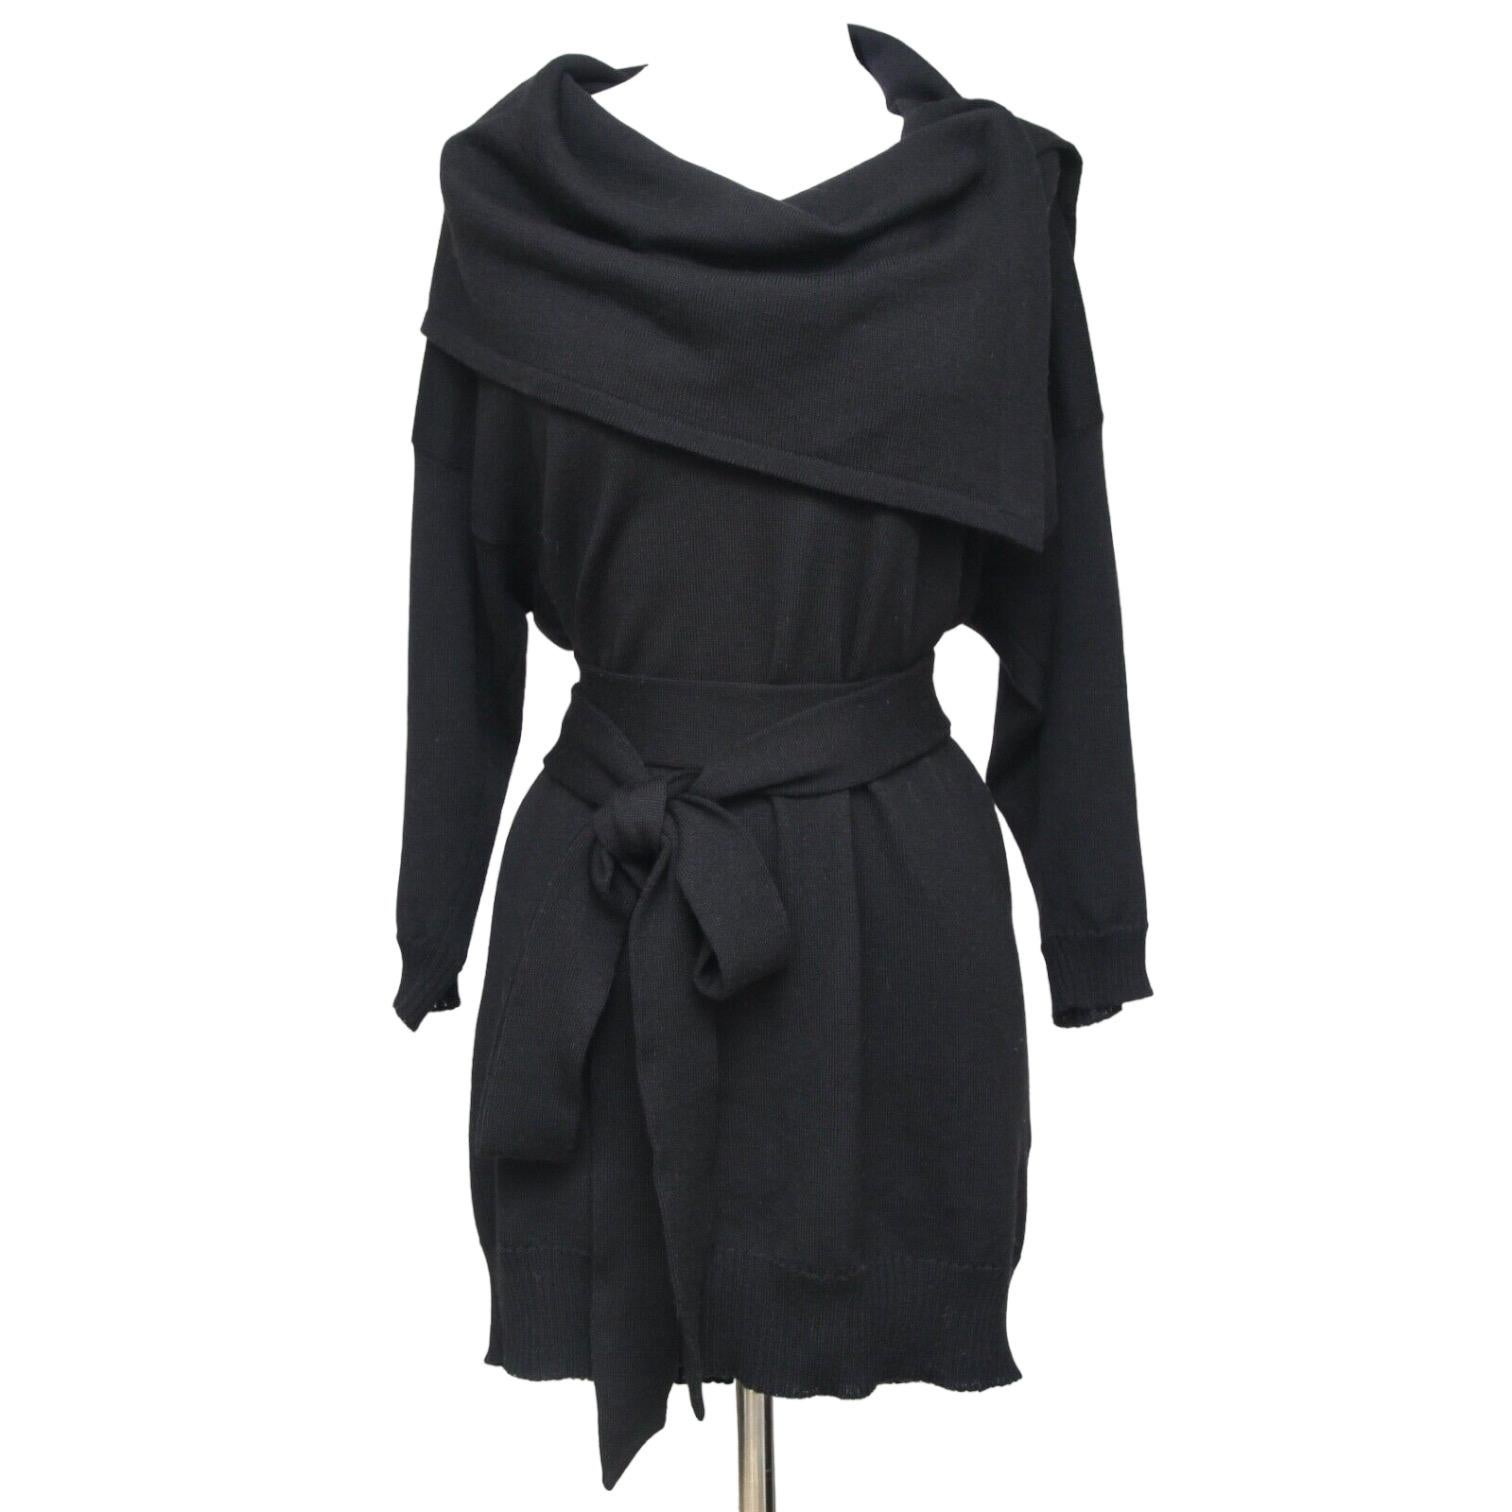 GUARANTEED AUTHENTIC STELLA MCCARTNEY BLACK WOOL TUNIC SWEATER
 Details:
 • Black knit style tunic with matching detachable belt, great easy fit.
 • Exaggerated cowl neck with large snaps which can be adjusted for style.
 • Ribbing at arms and hem.
